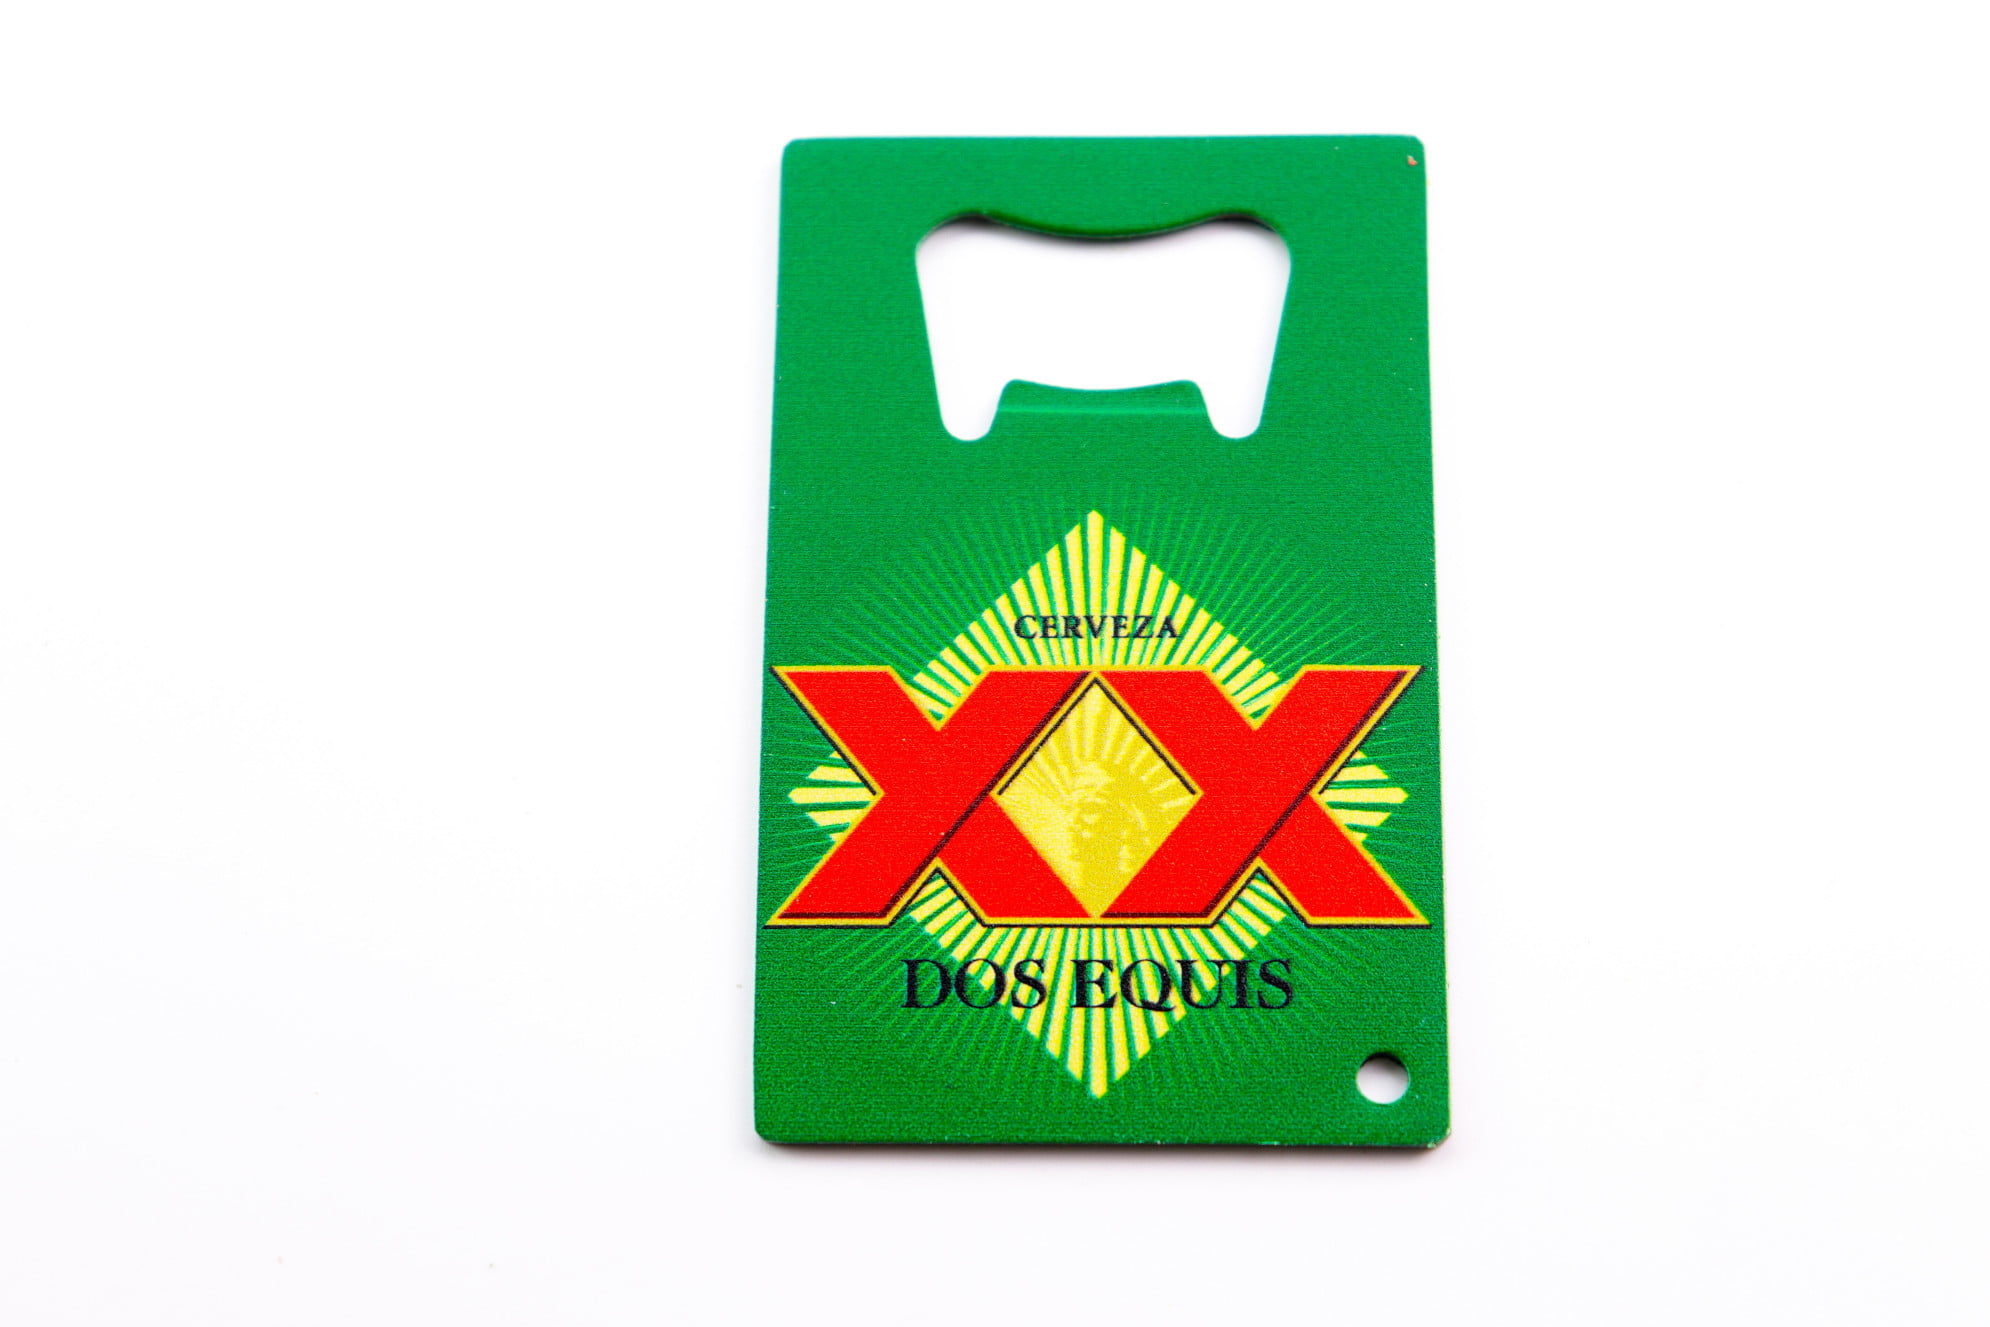 Pack Of 25 DOS EQUIS Beer bottle openers NEW in Package 